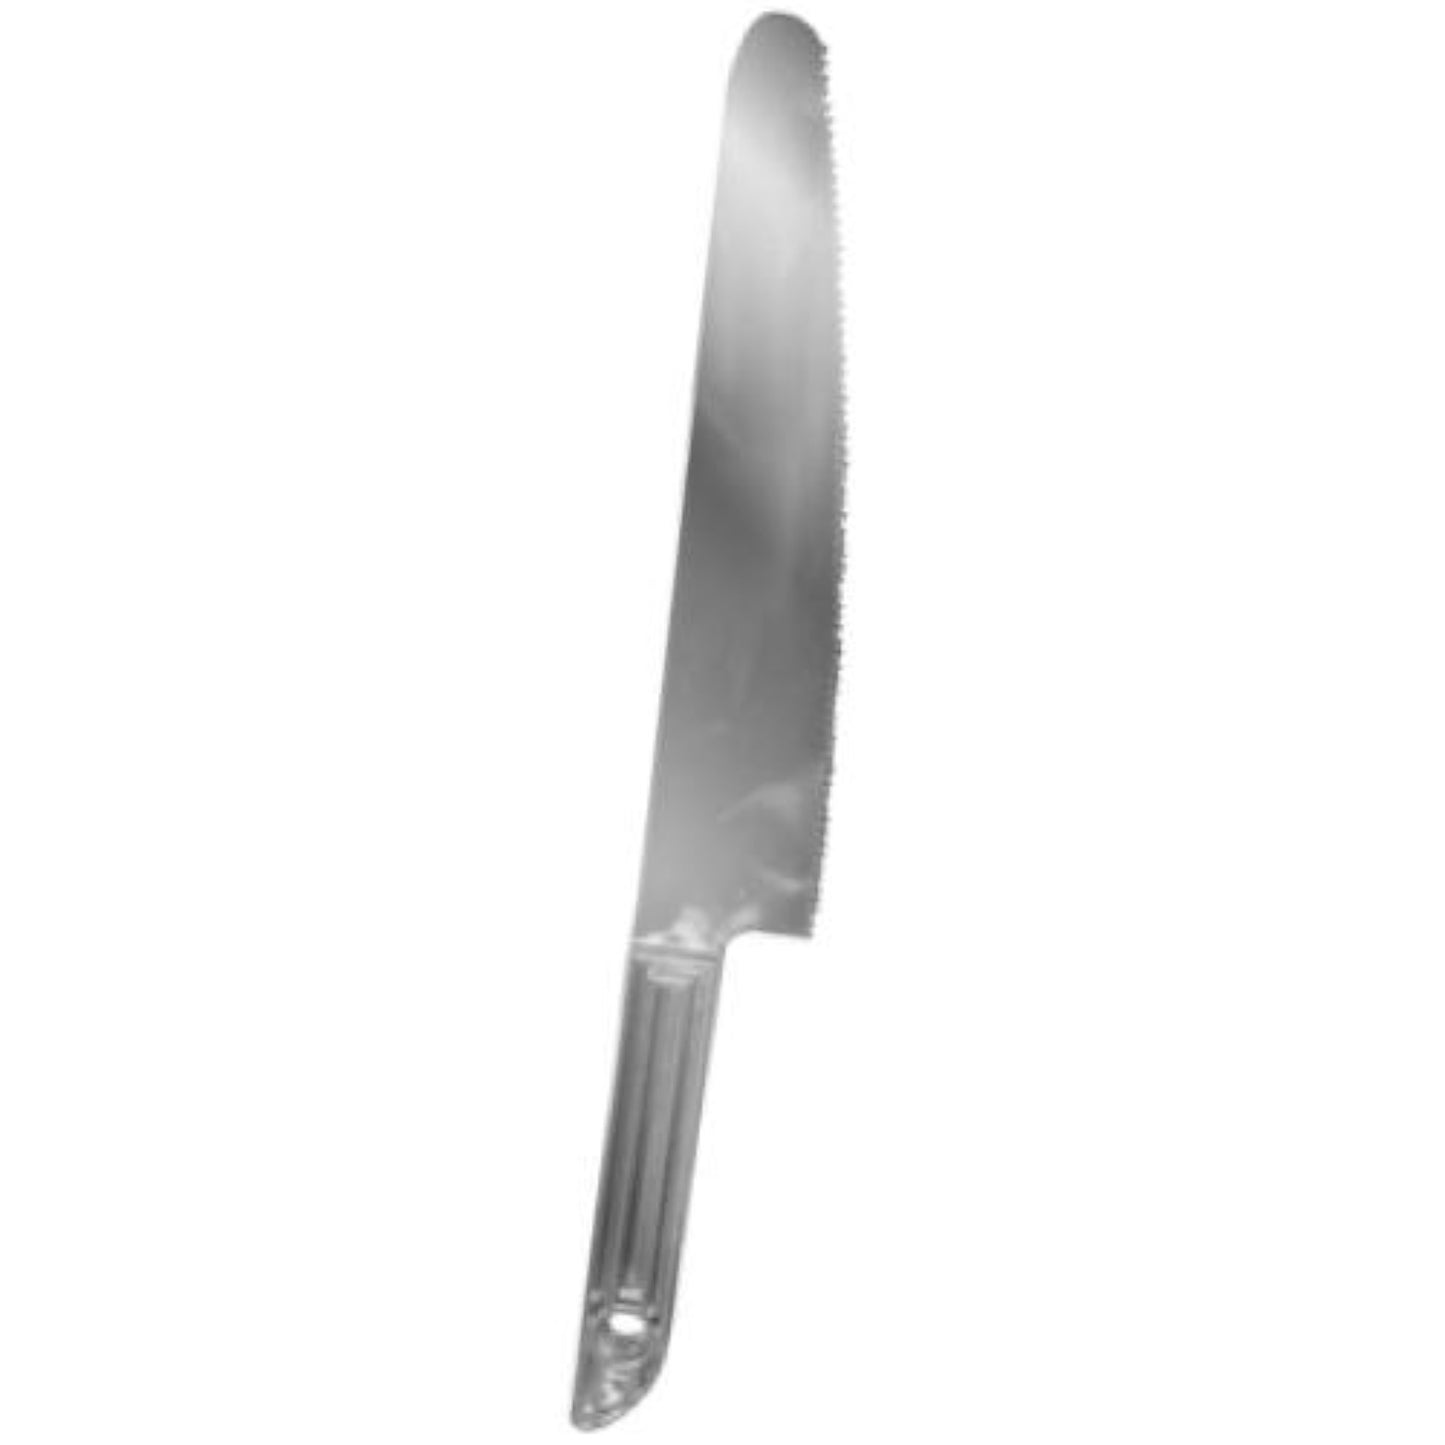 SALE Decor Modern Design Silver Knife 10" heavy weight 1 count Tablesettings Decorline   